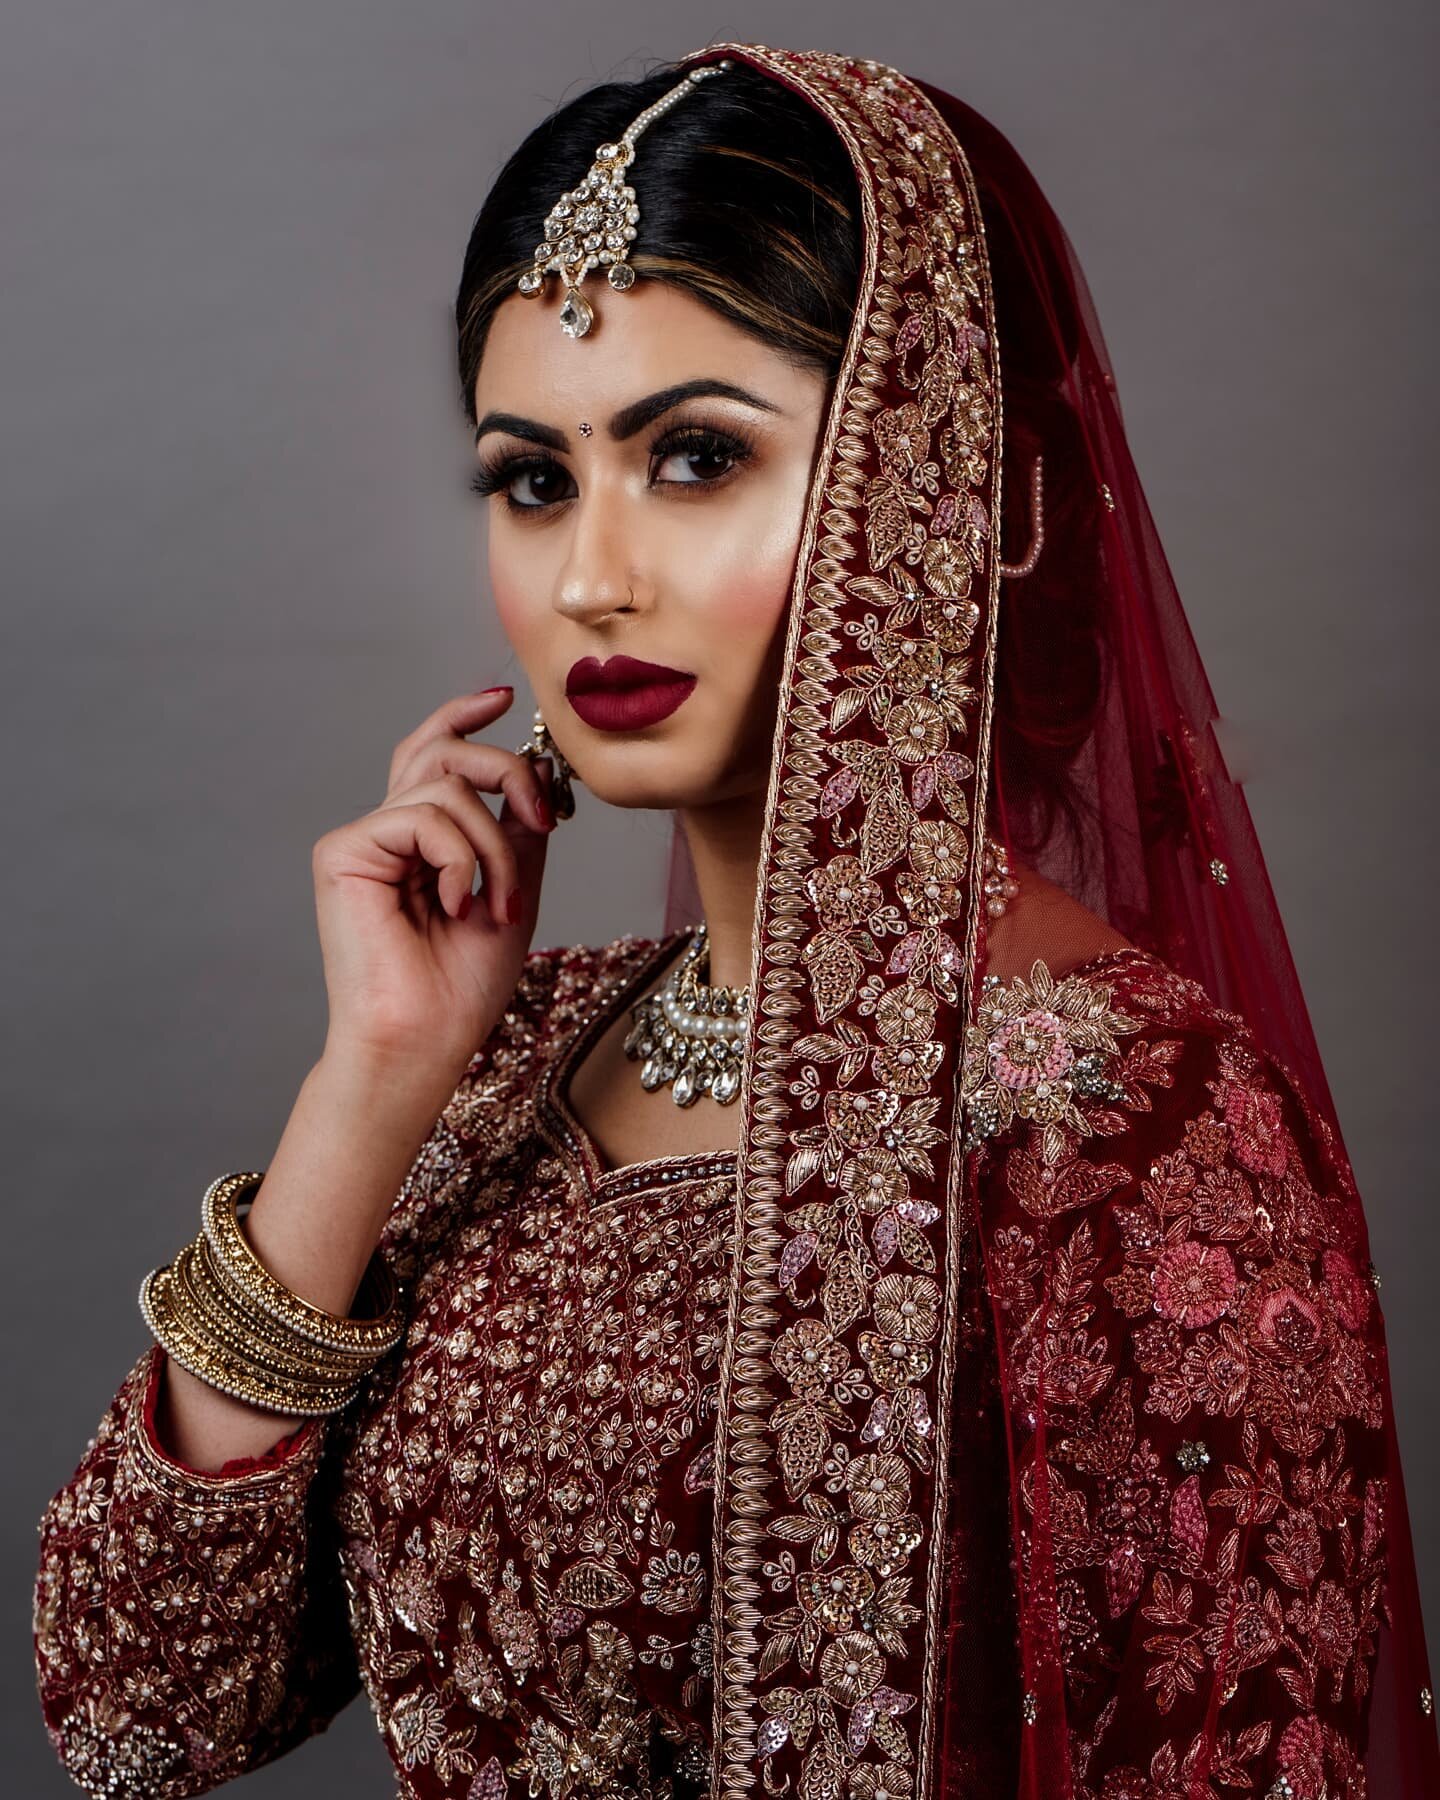 The look we have been waiting to share.. Our BEAUTIFUL Asian Bridal Look 🥰

I love everything about Asian Bridal looks. They are super colourful &amp; the brides always look phenomenal. 

There is always a WOW reaction from everyone. 😍
____________